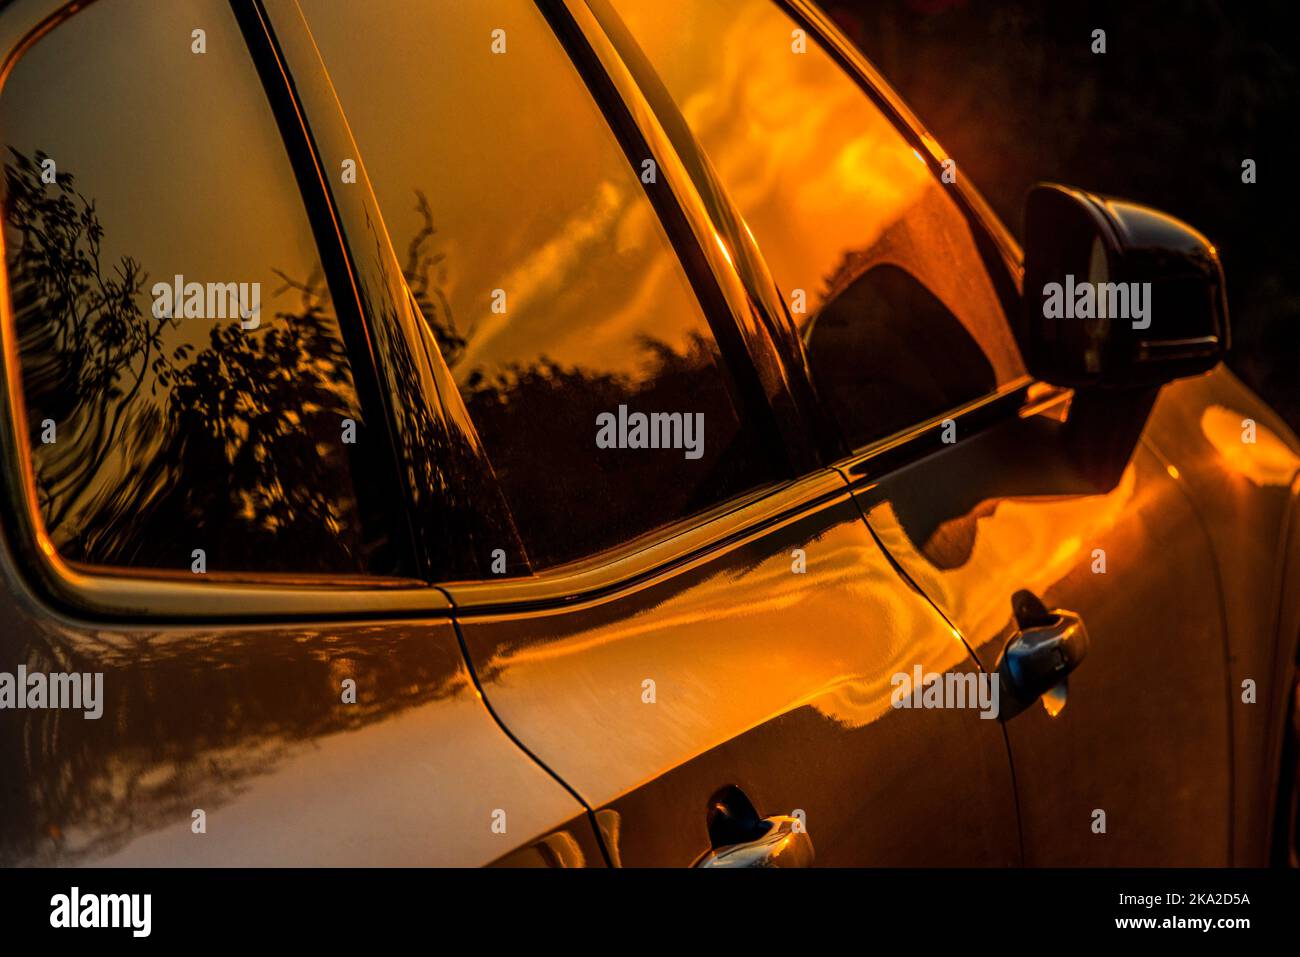 Sunset highlights on the metal surface and windows of a modern Volvo car. Stock Photo